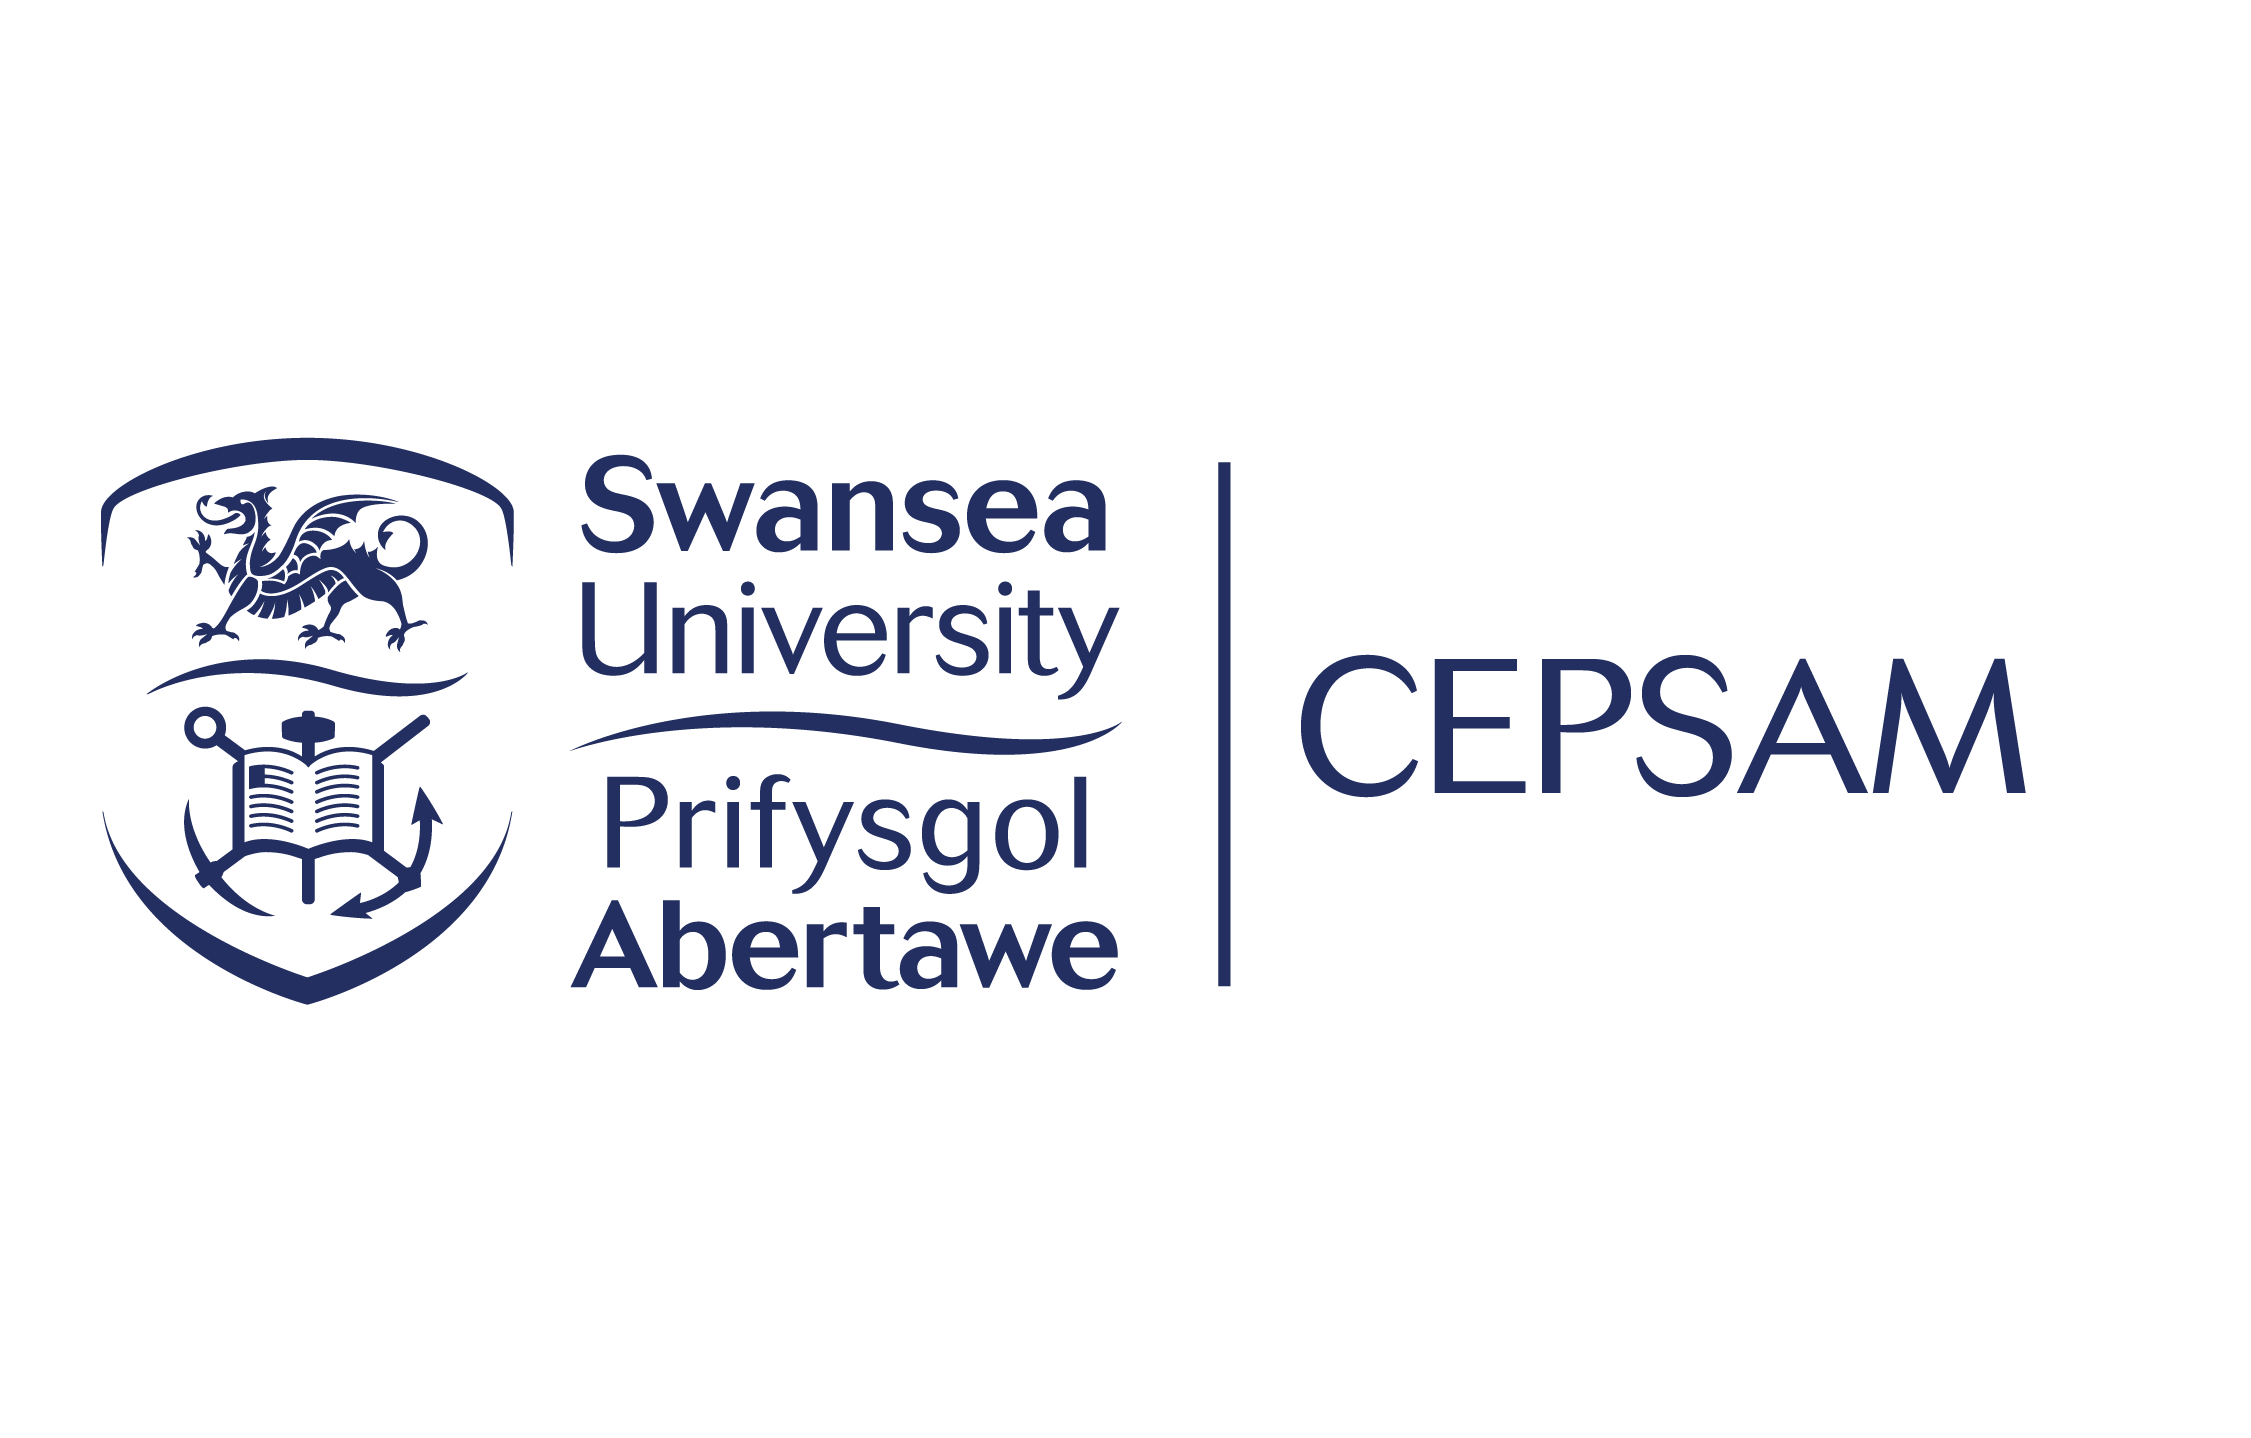 CEPSAM logo, which features its acronym next to the official Swansea University logo.